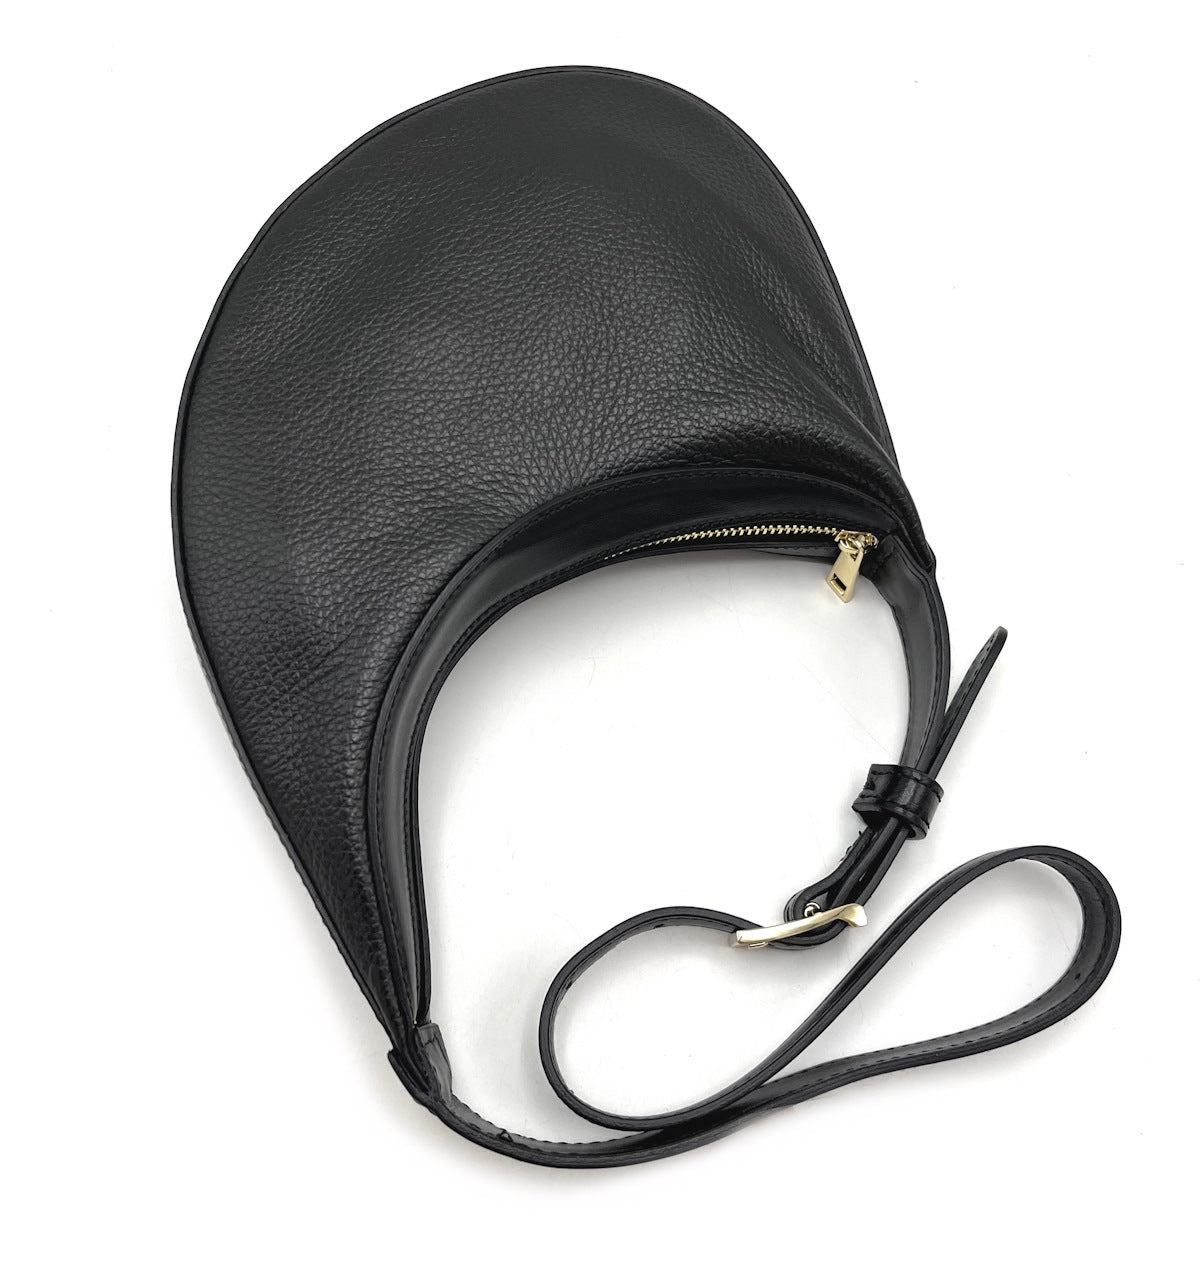 Genuine leather shoulder bag, Made in Italy, art. 112462